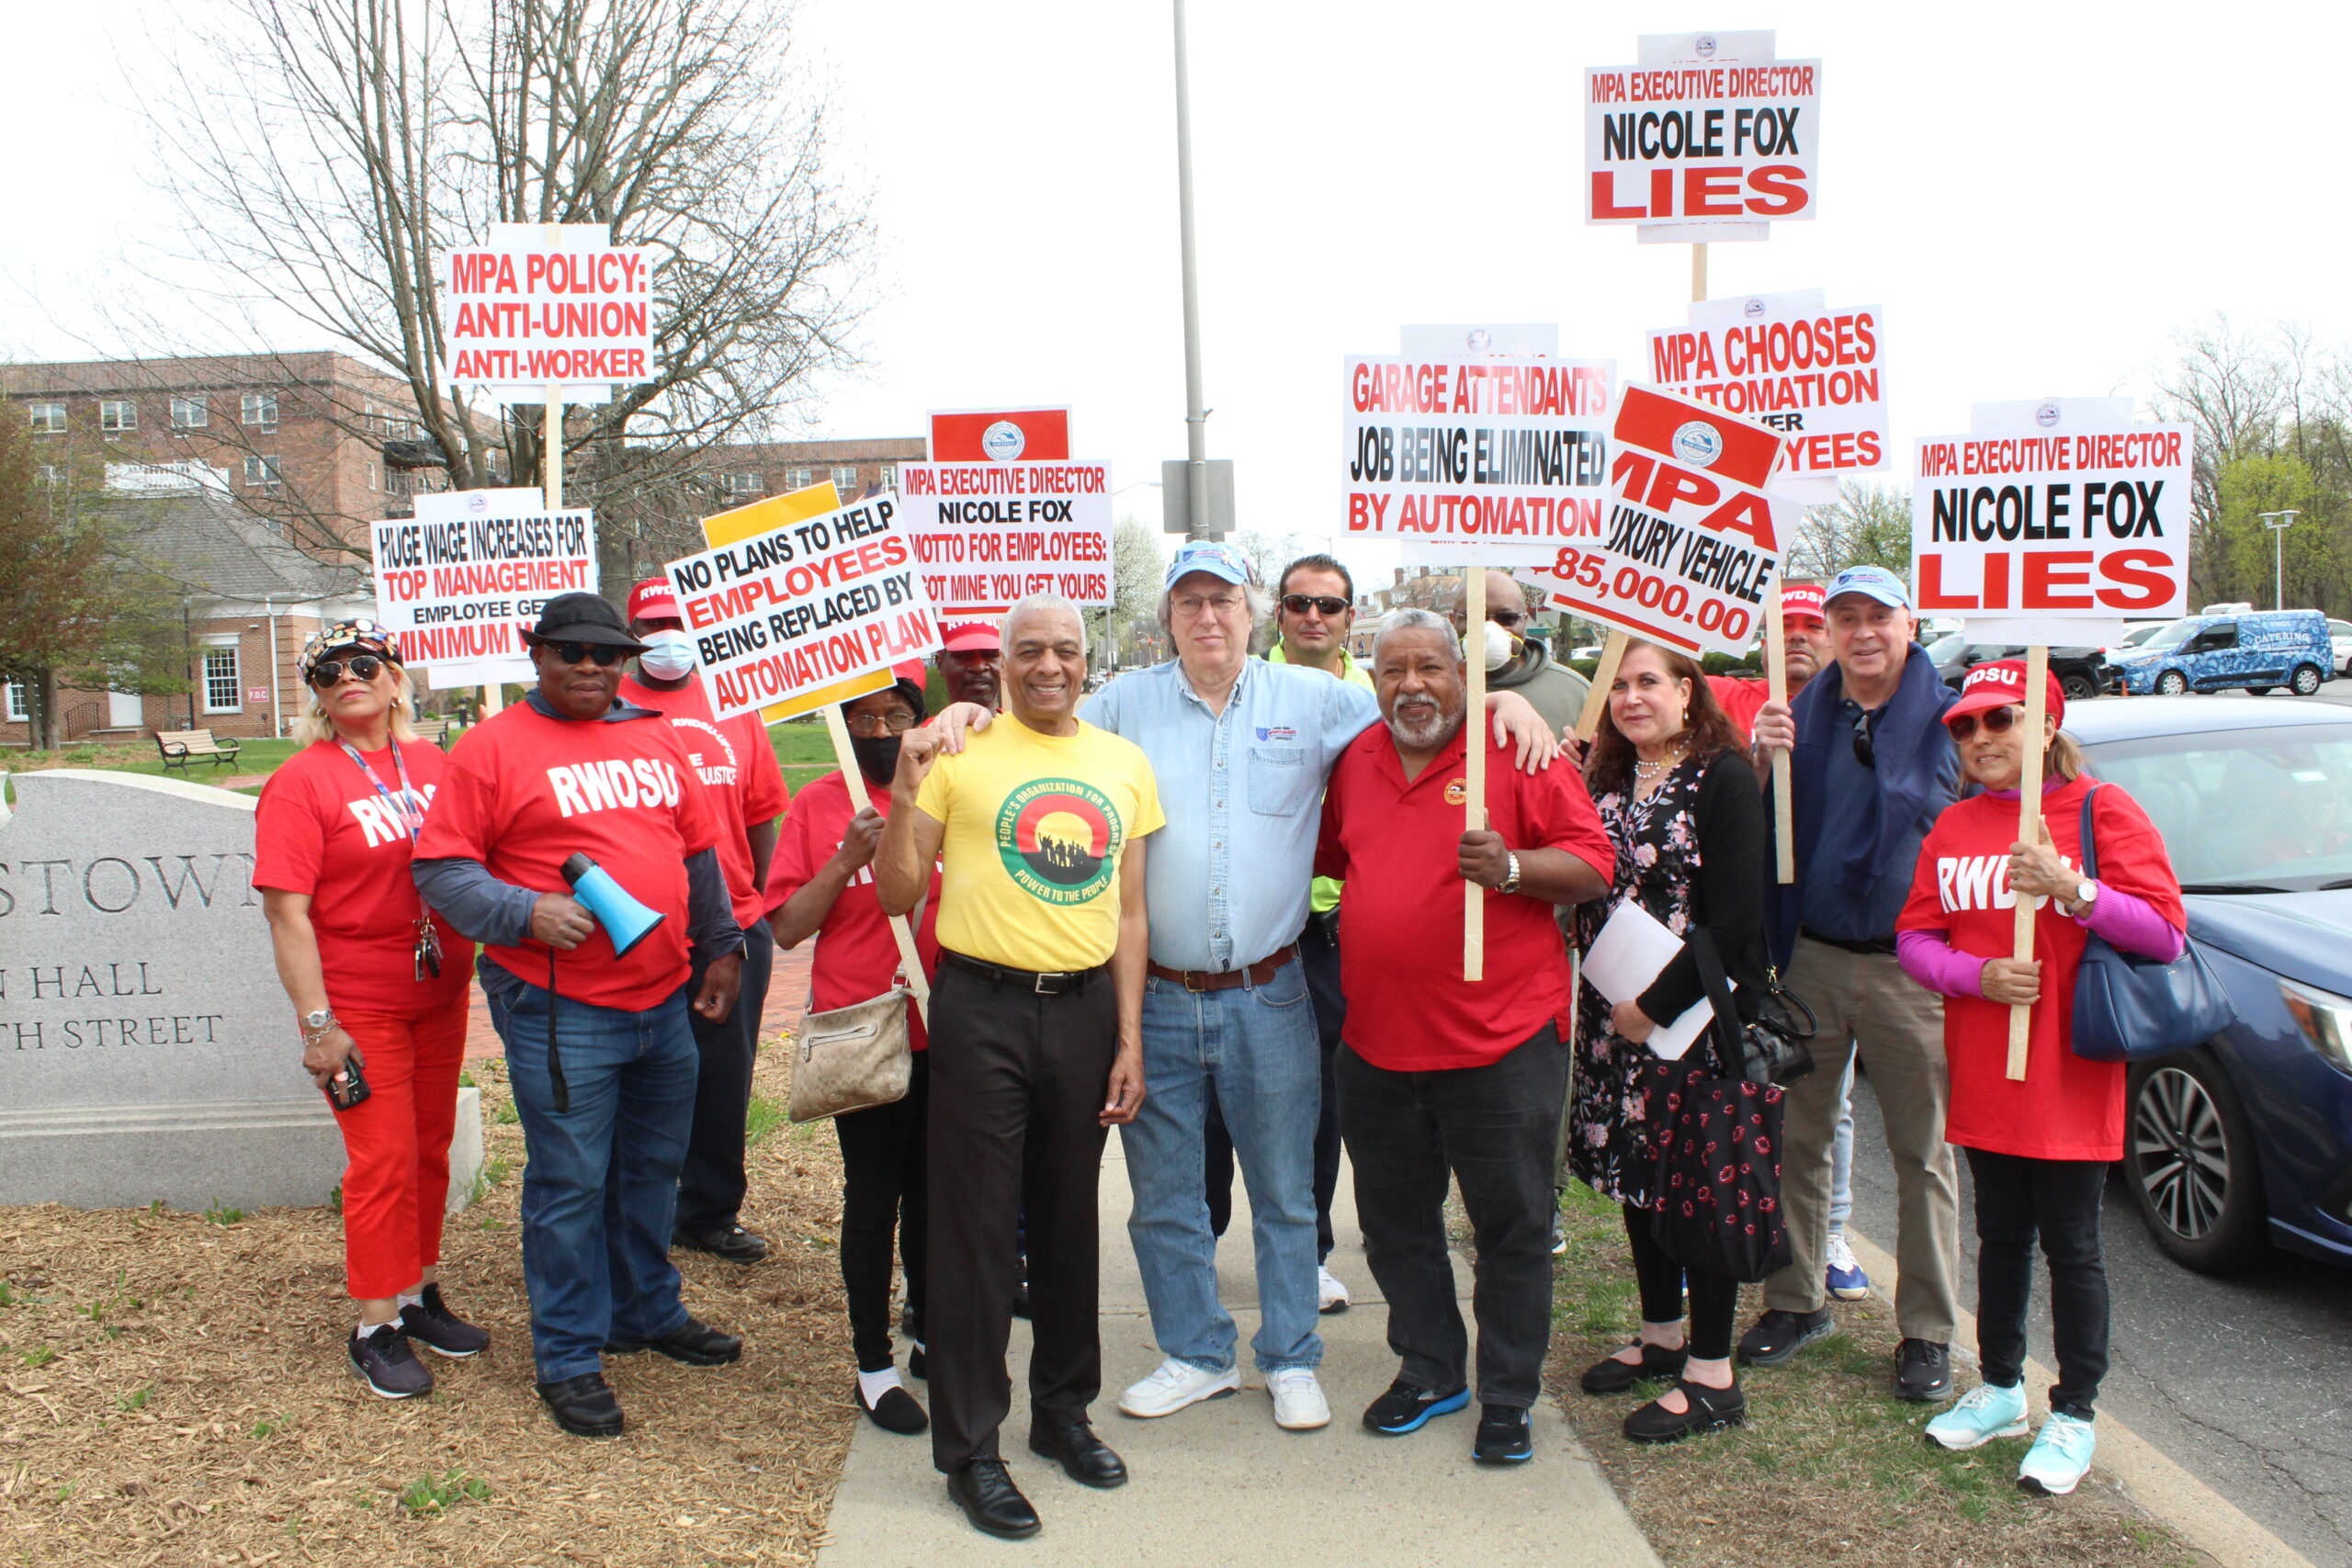 “New Jersey Workers Protest Against the Implementation of Automation in the Workplace”